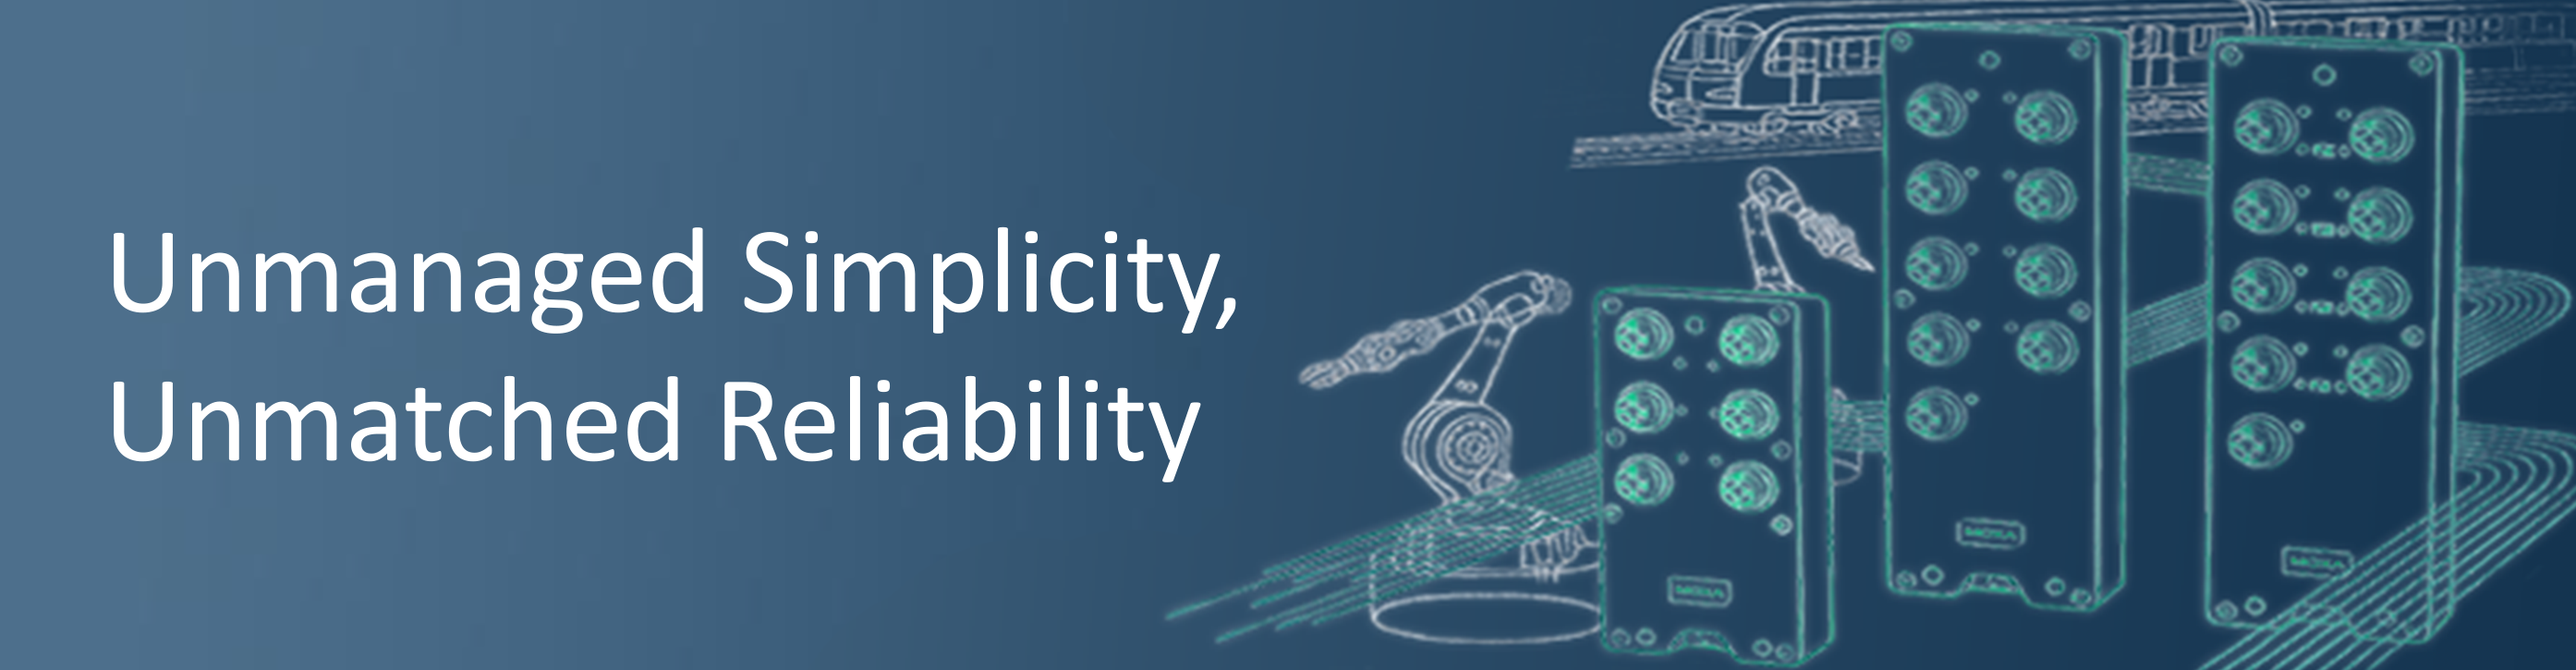 Unmanaged Simplicity Unmatched Reliability